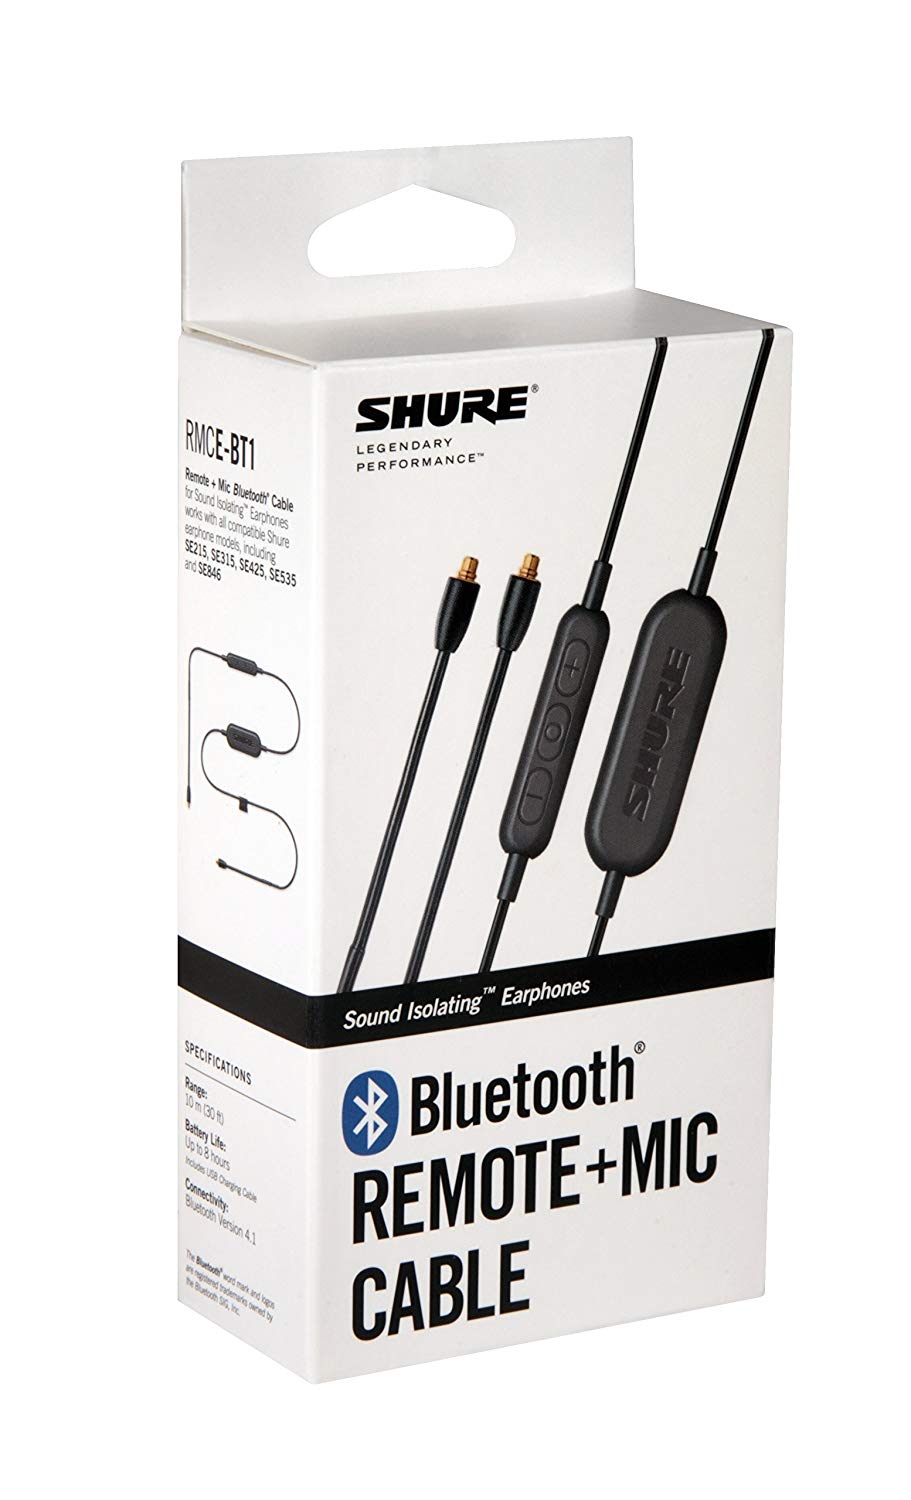 Shure RMCE-BT1 Bluetooth Enabled Accessory Cable with Remote + M